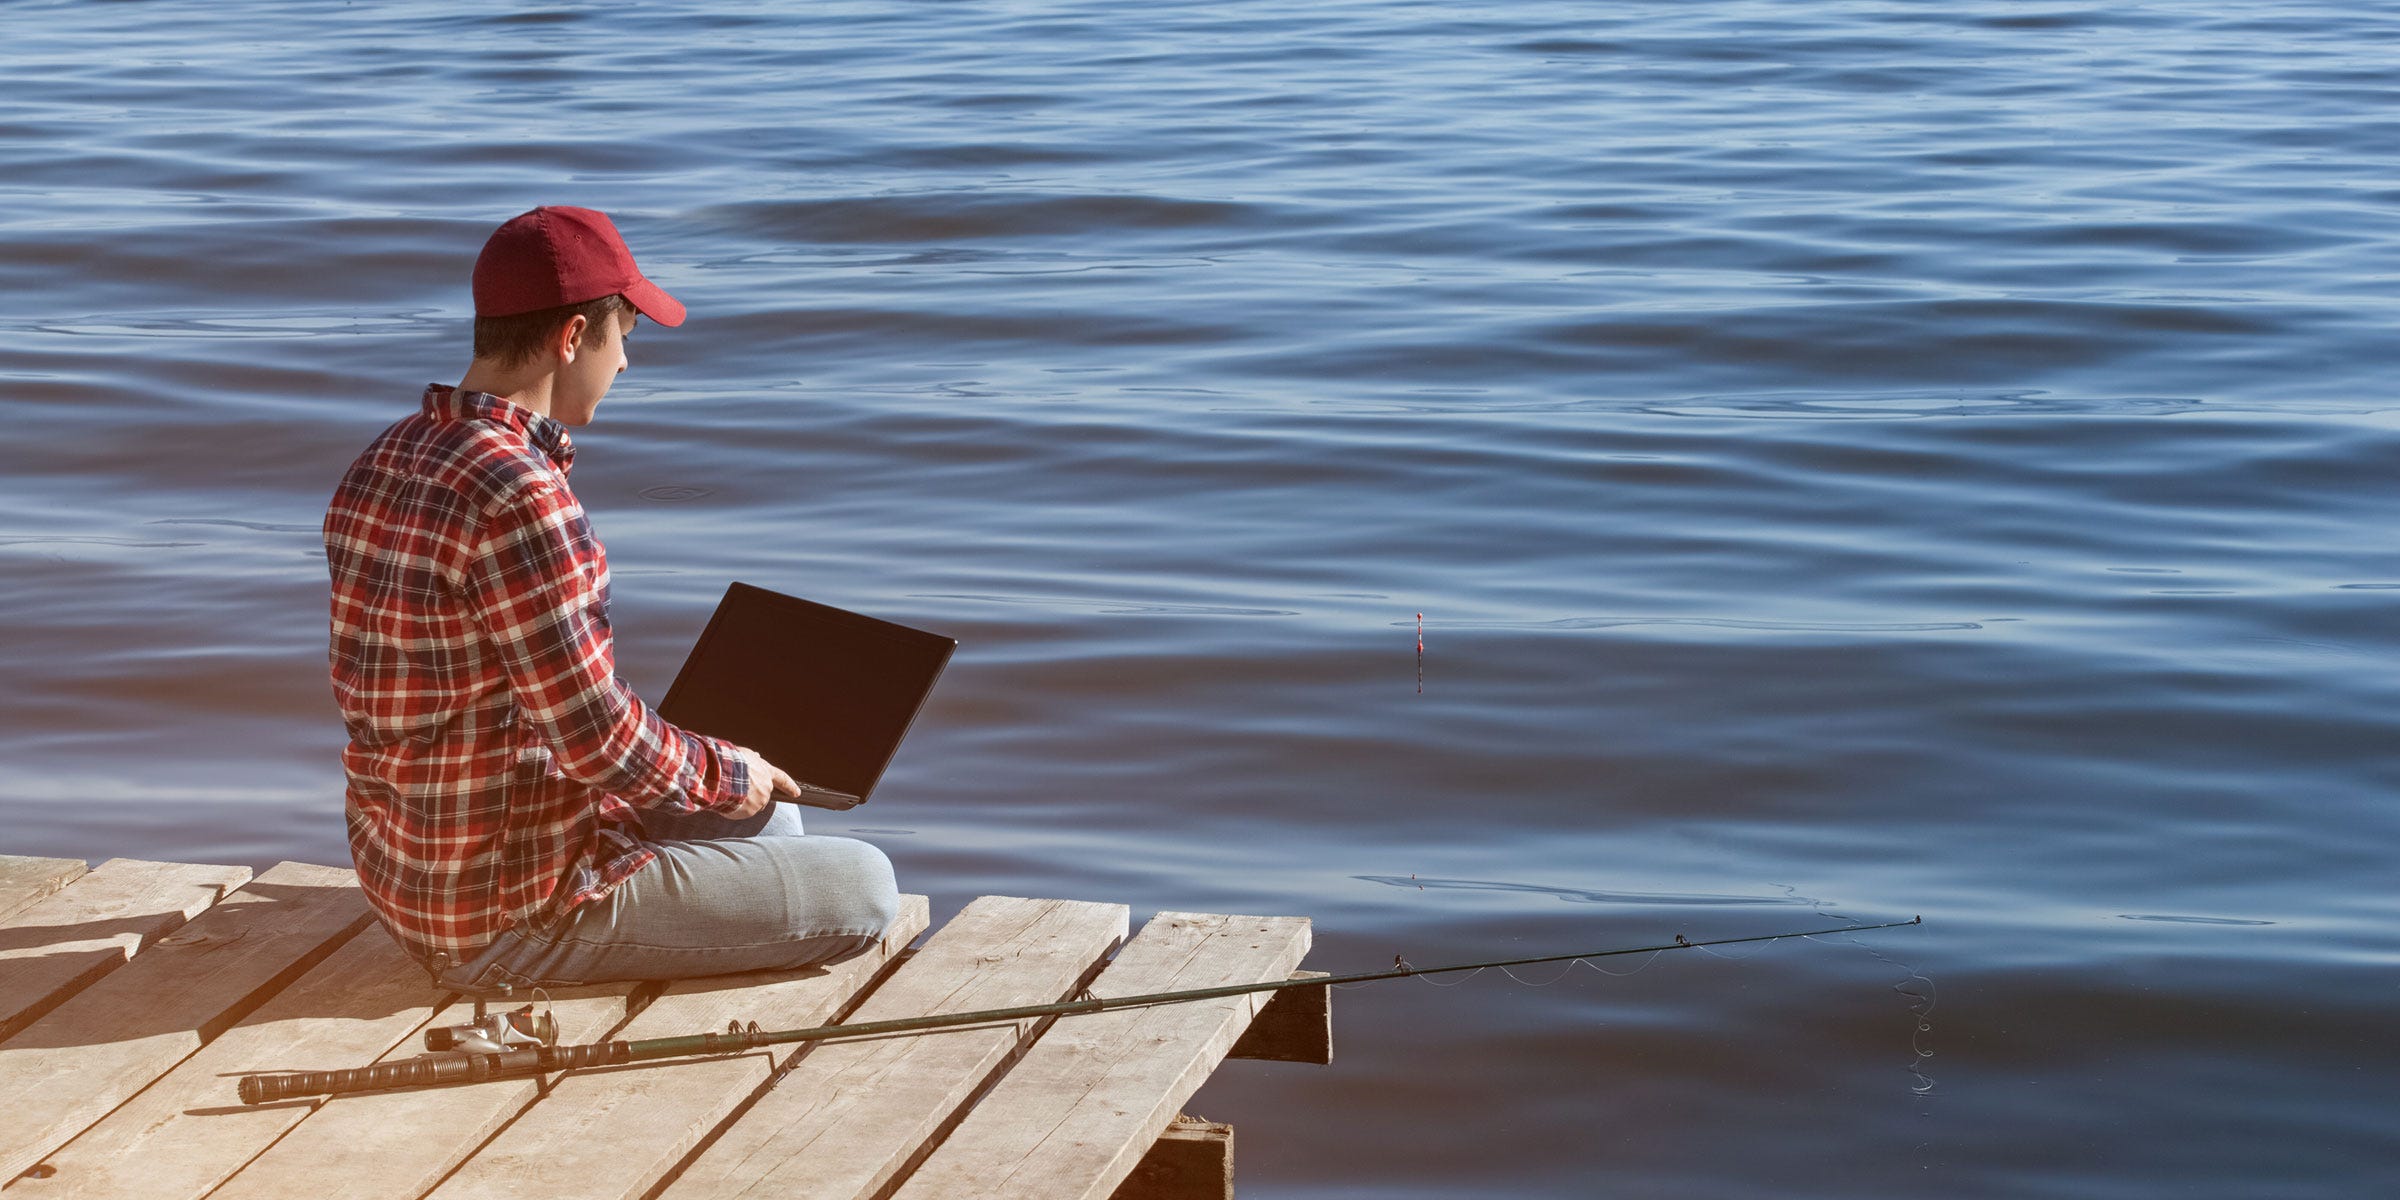 Man on dock with laptop gone writing instead of fishing.